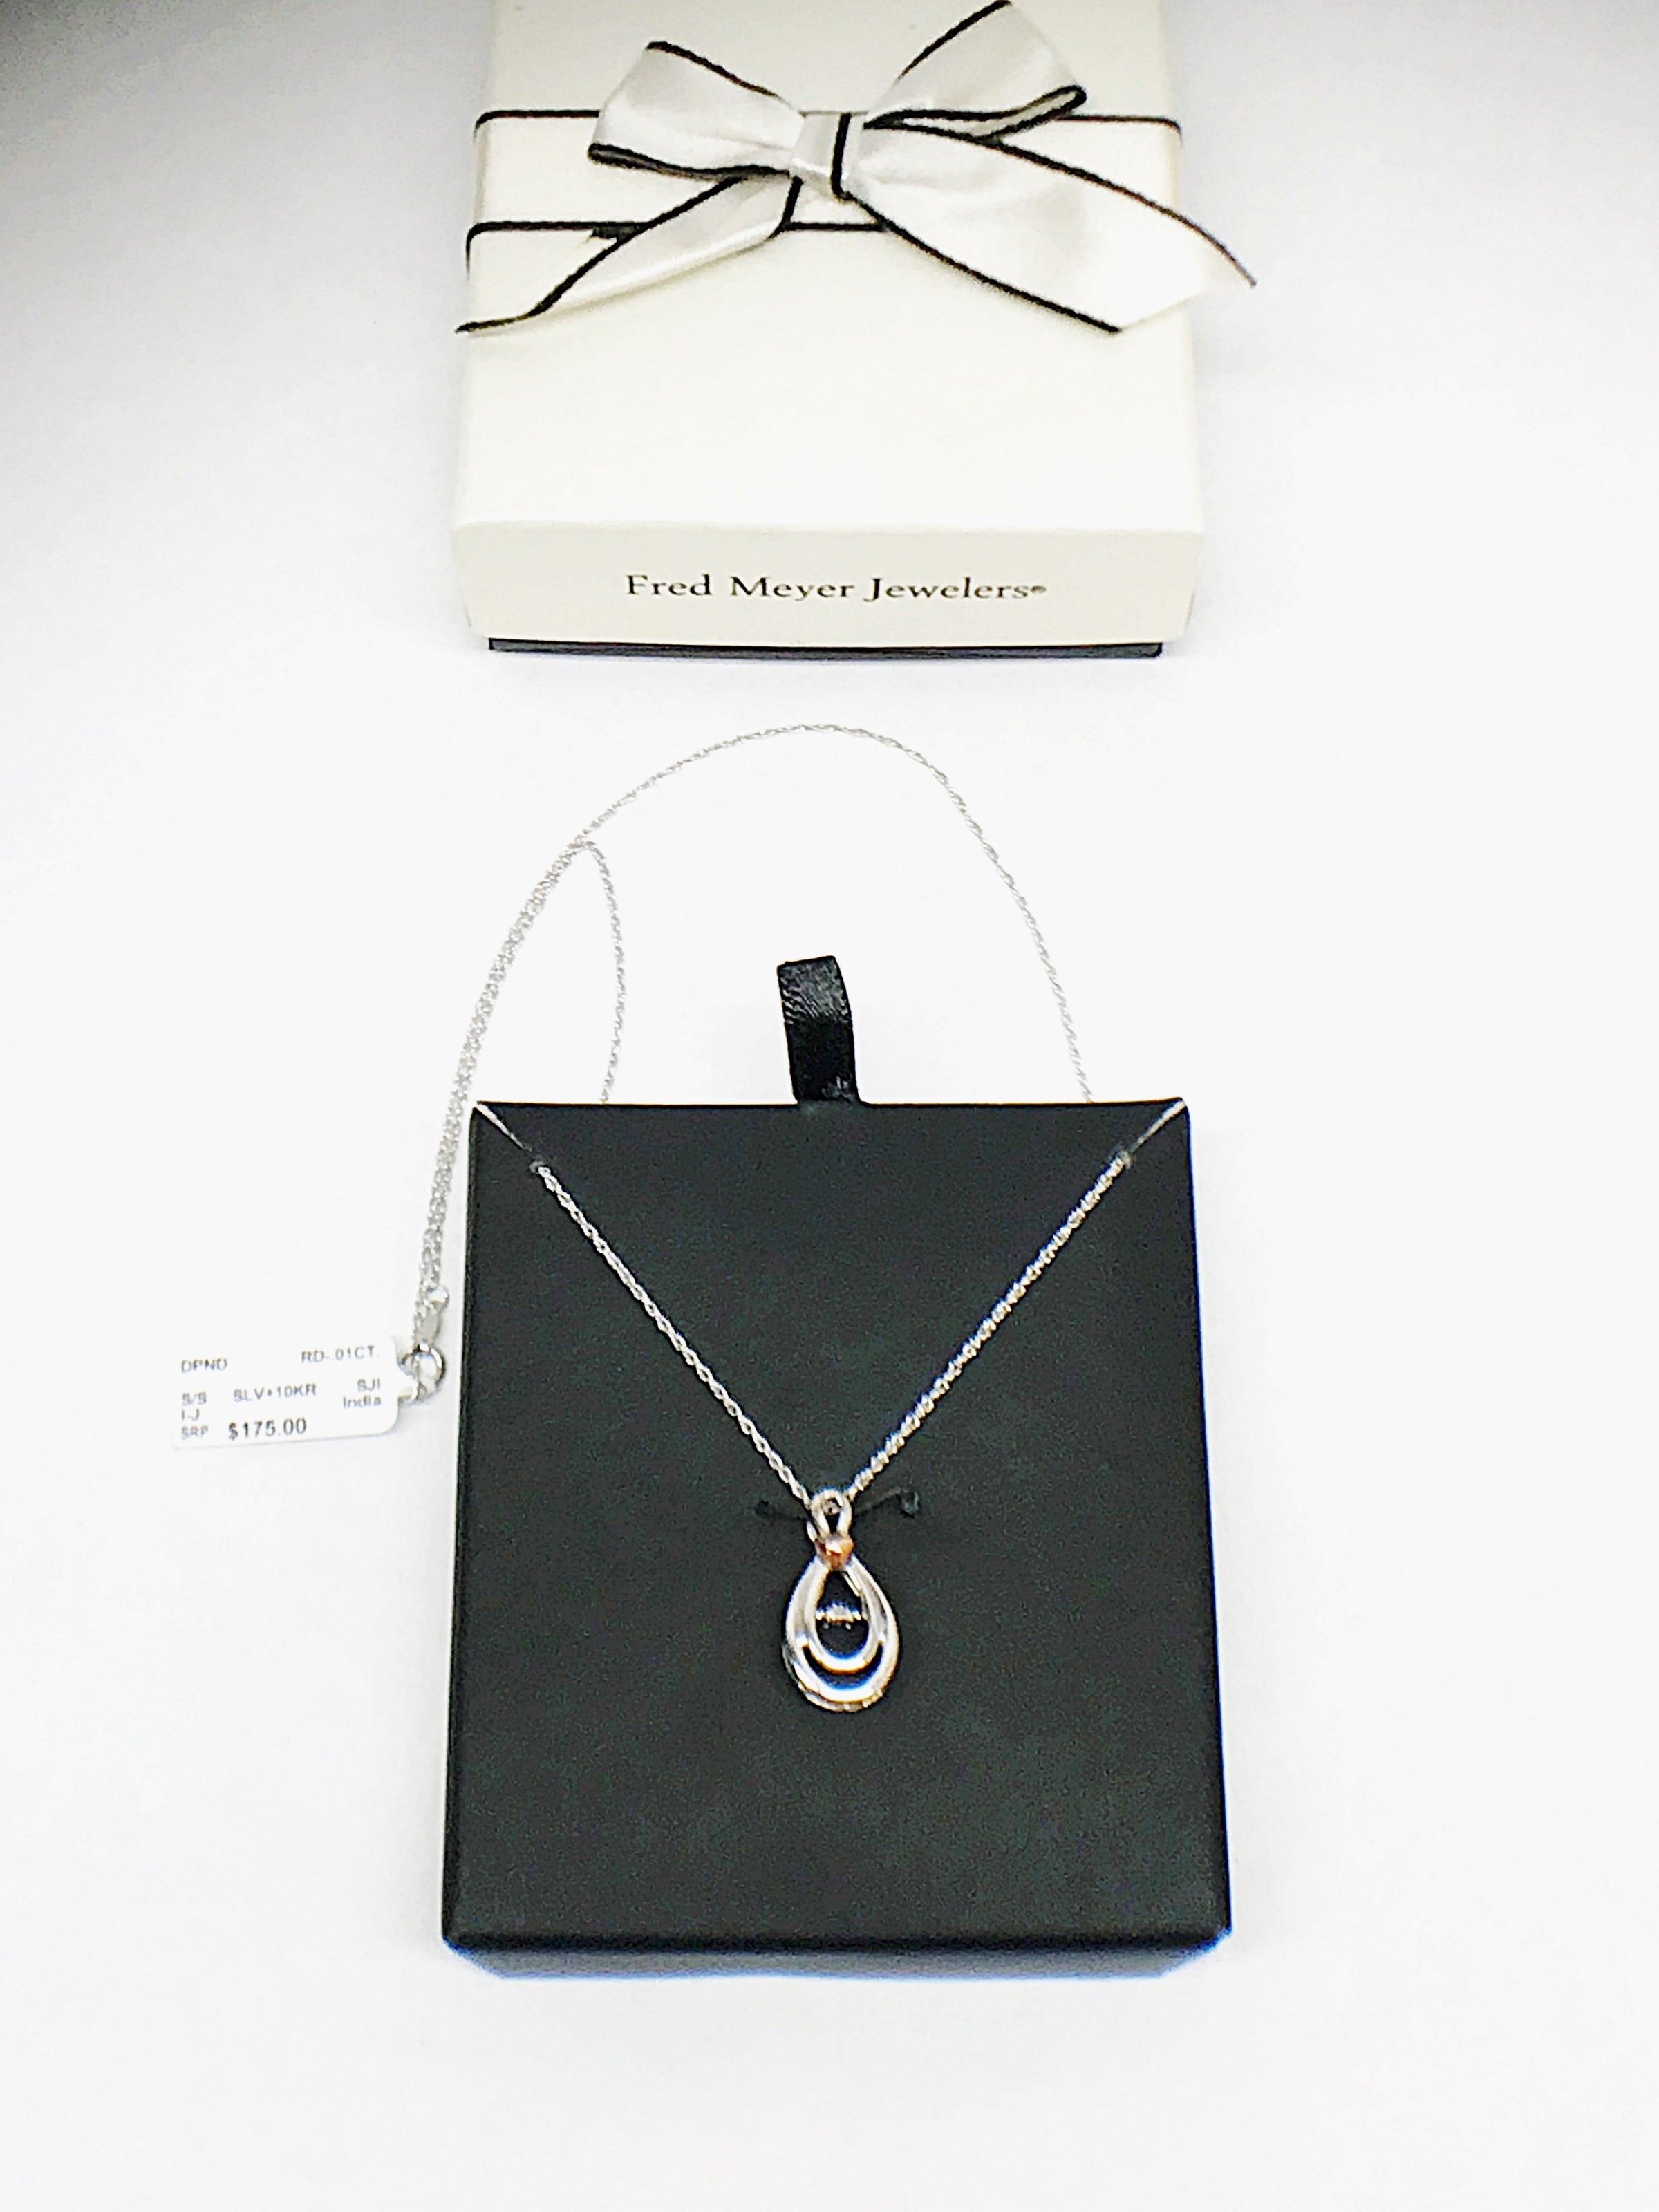 Jewelry, Fred Meyer Jewelers Double Heart Necklace